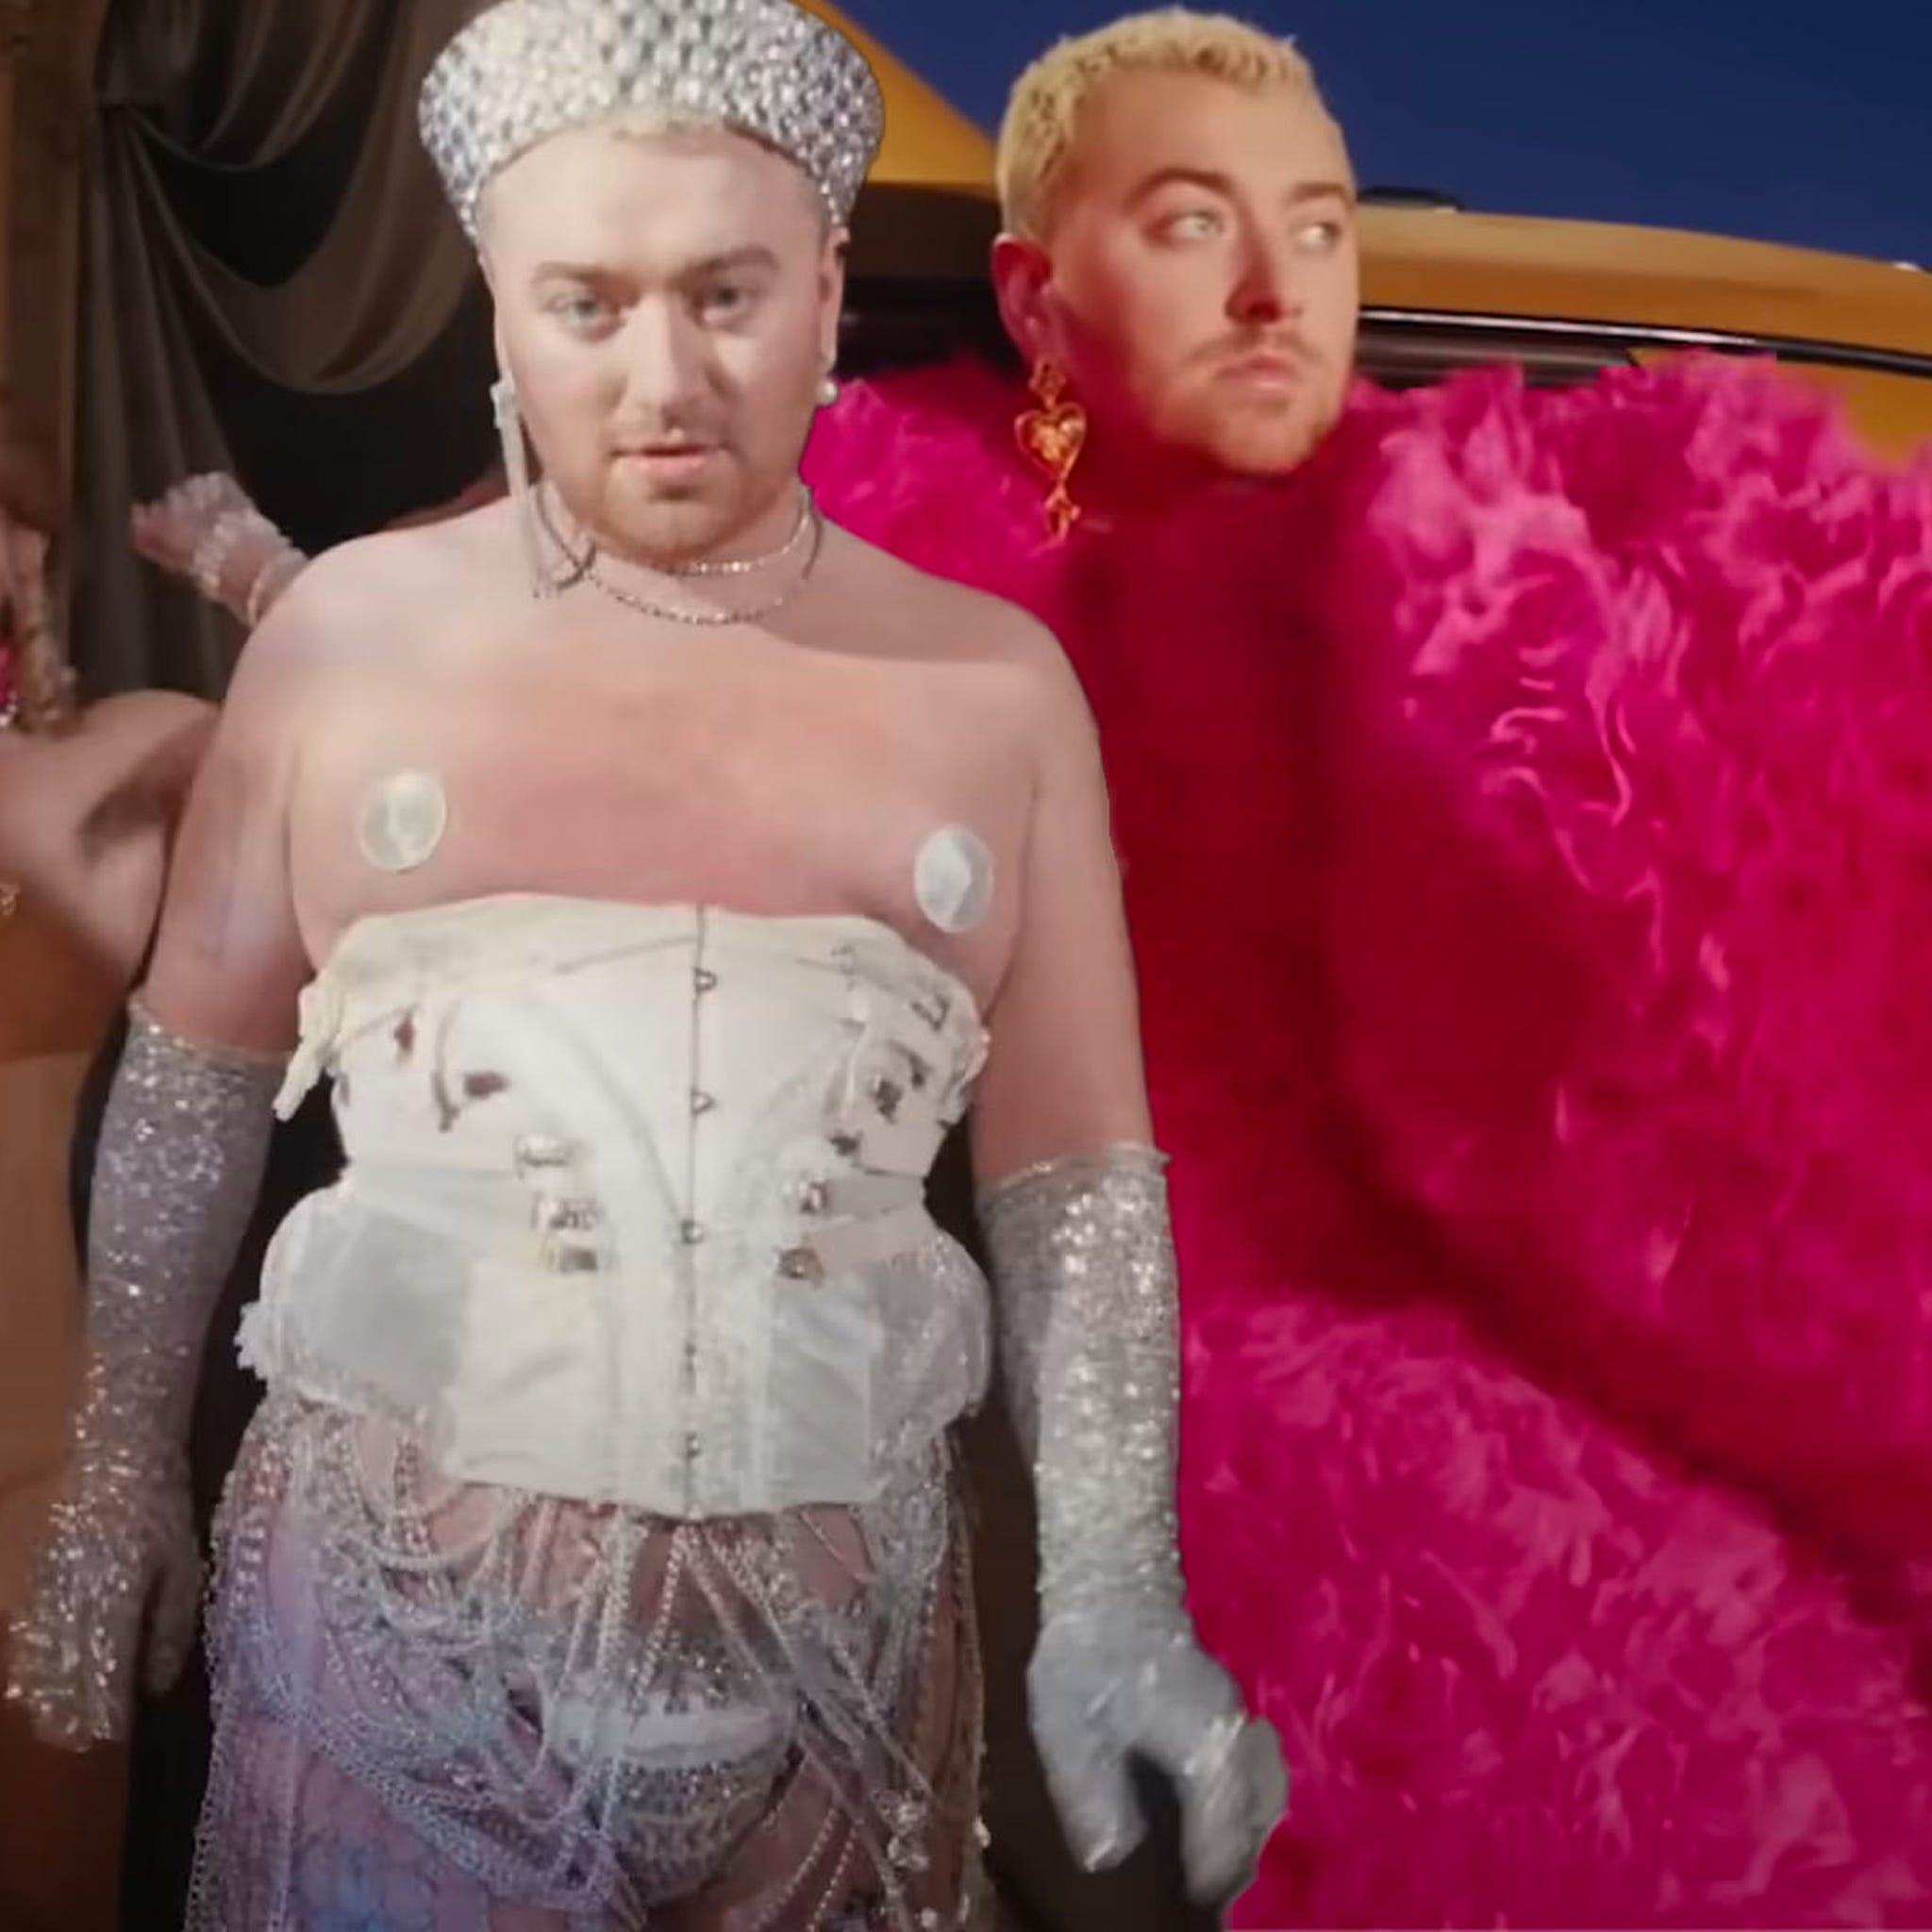 Sam Smith Posts About Their Music Video Outfits Following Backlash